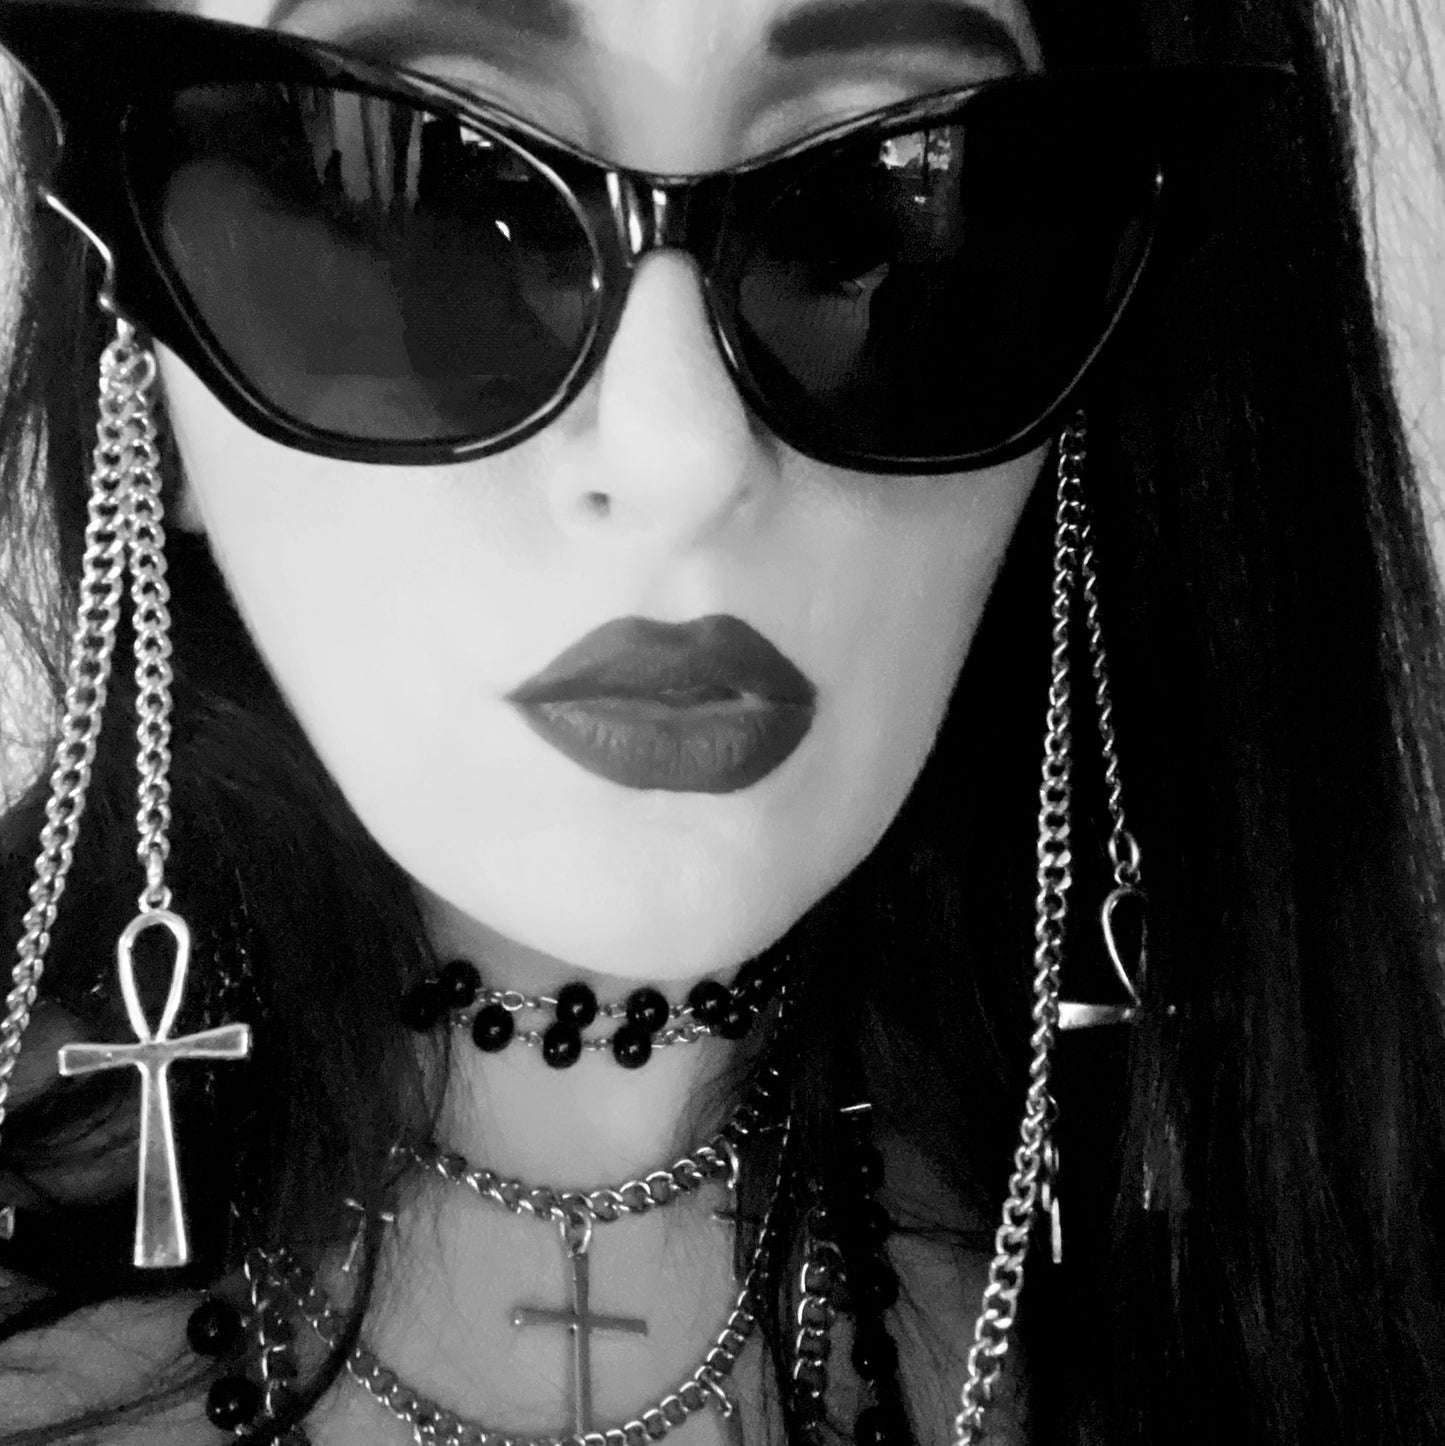 The Occultist Eyeglass Necklace Chain